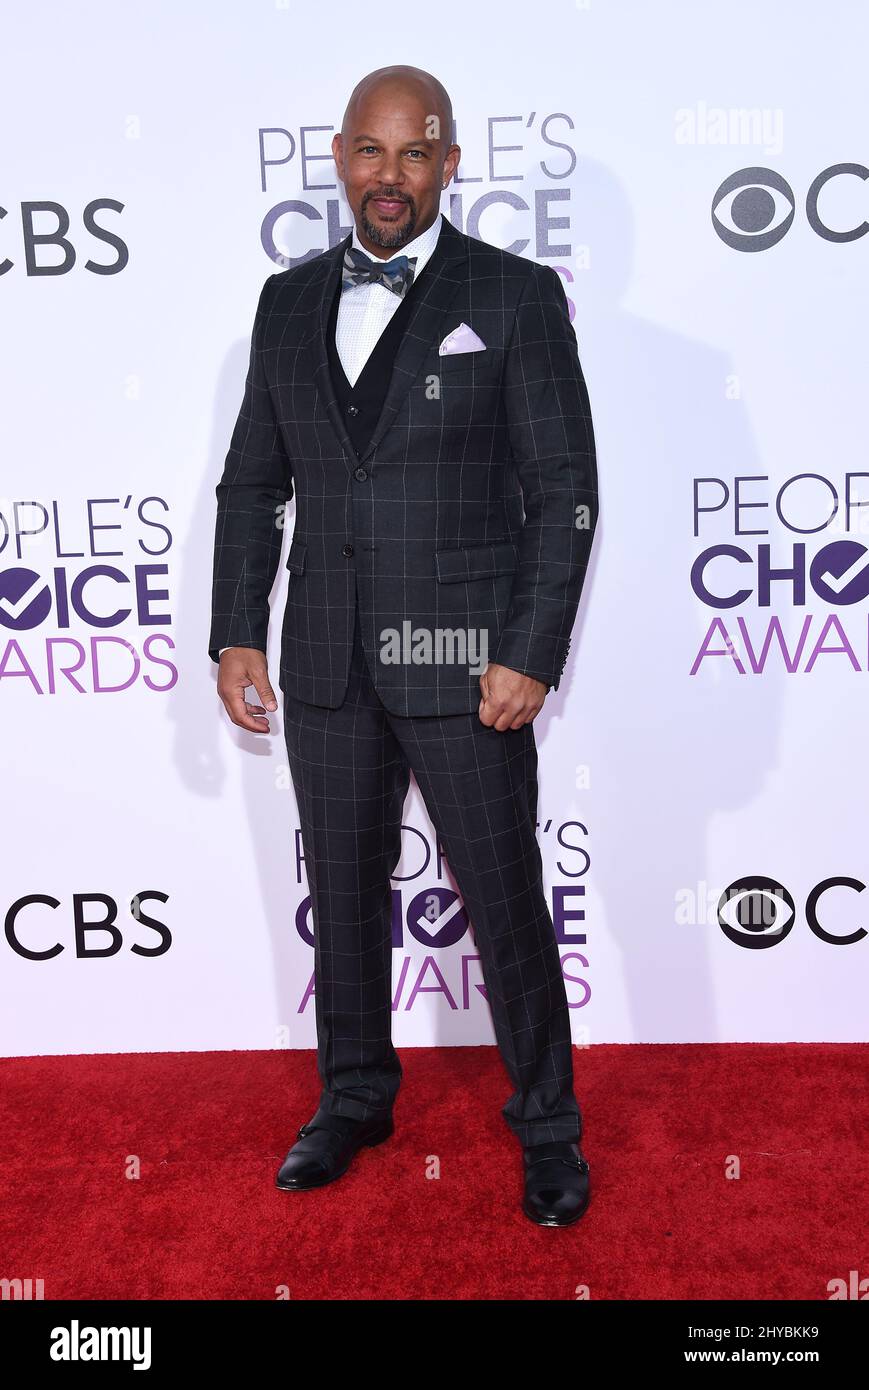 Chris Williams nimmt an den People's Choice Awards 2017 im Microsoft Theater L.A. Teil Live in LSO Angeles, USA Stockfoto